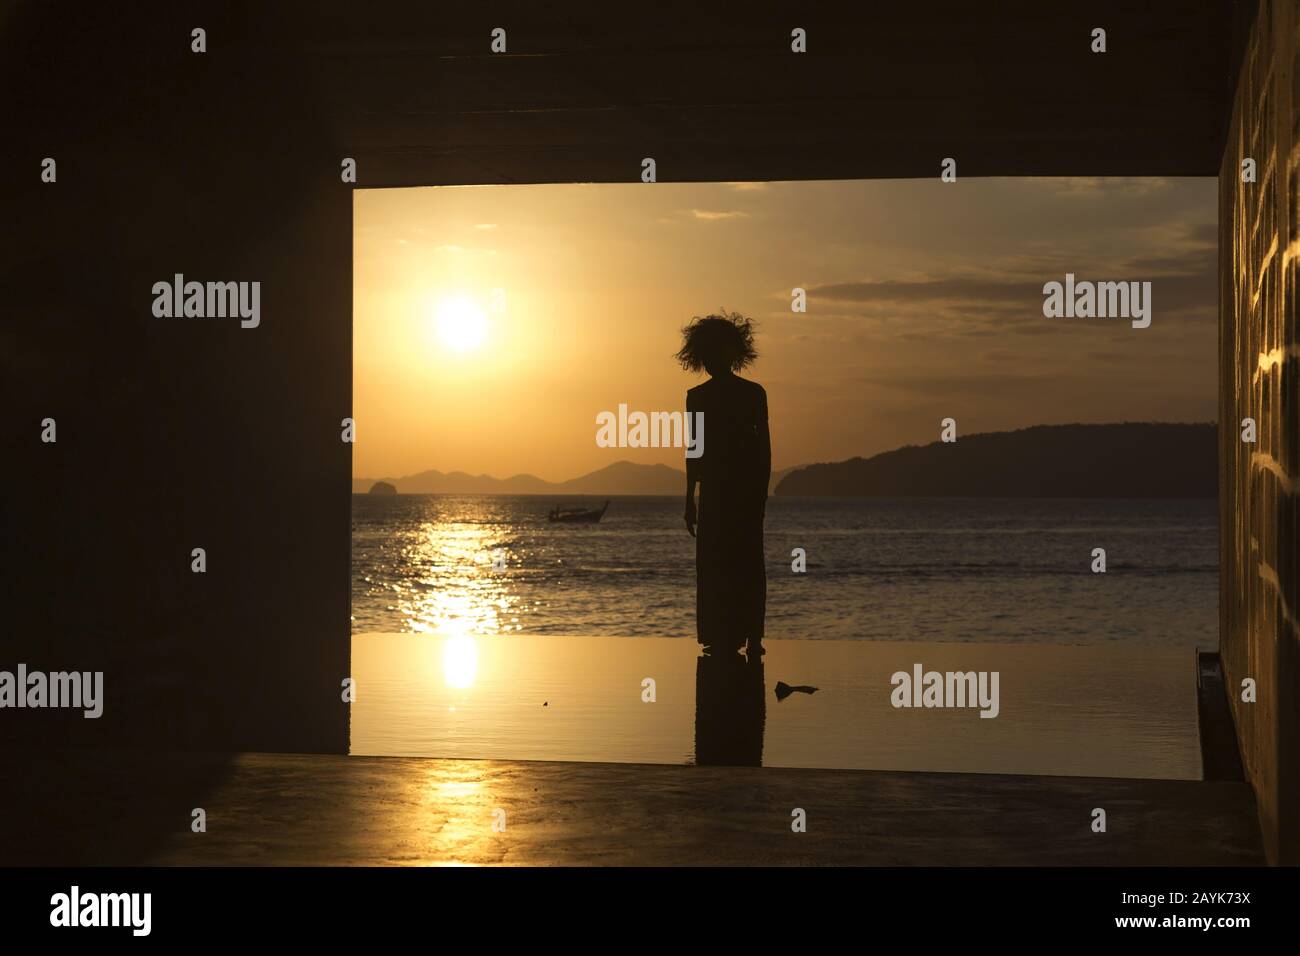 “No Sunrise No Sunset” Thai Art Biennale 2018 at Ao Nang Beach showing silhouette of old woman at the end of dark tunnel against Andaman Sea Seascape Stock Photo